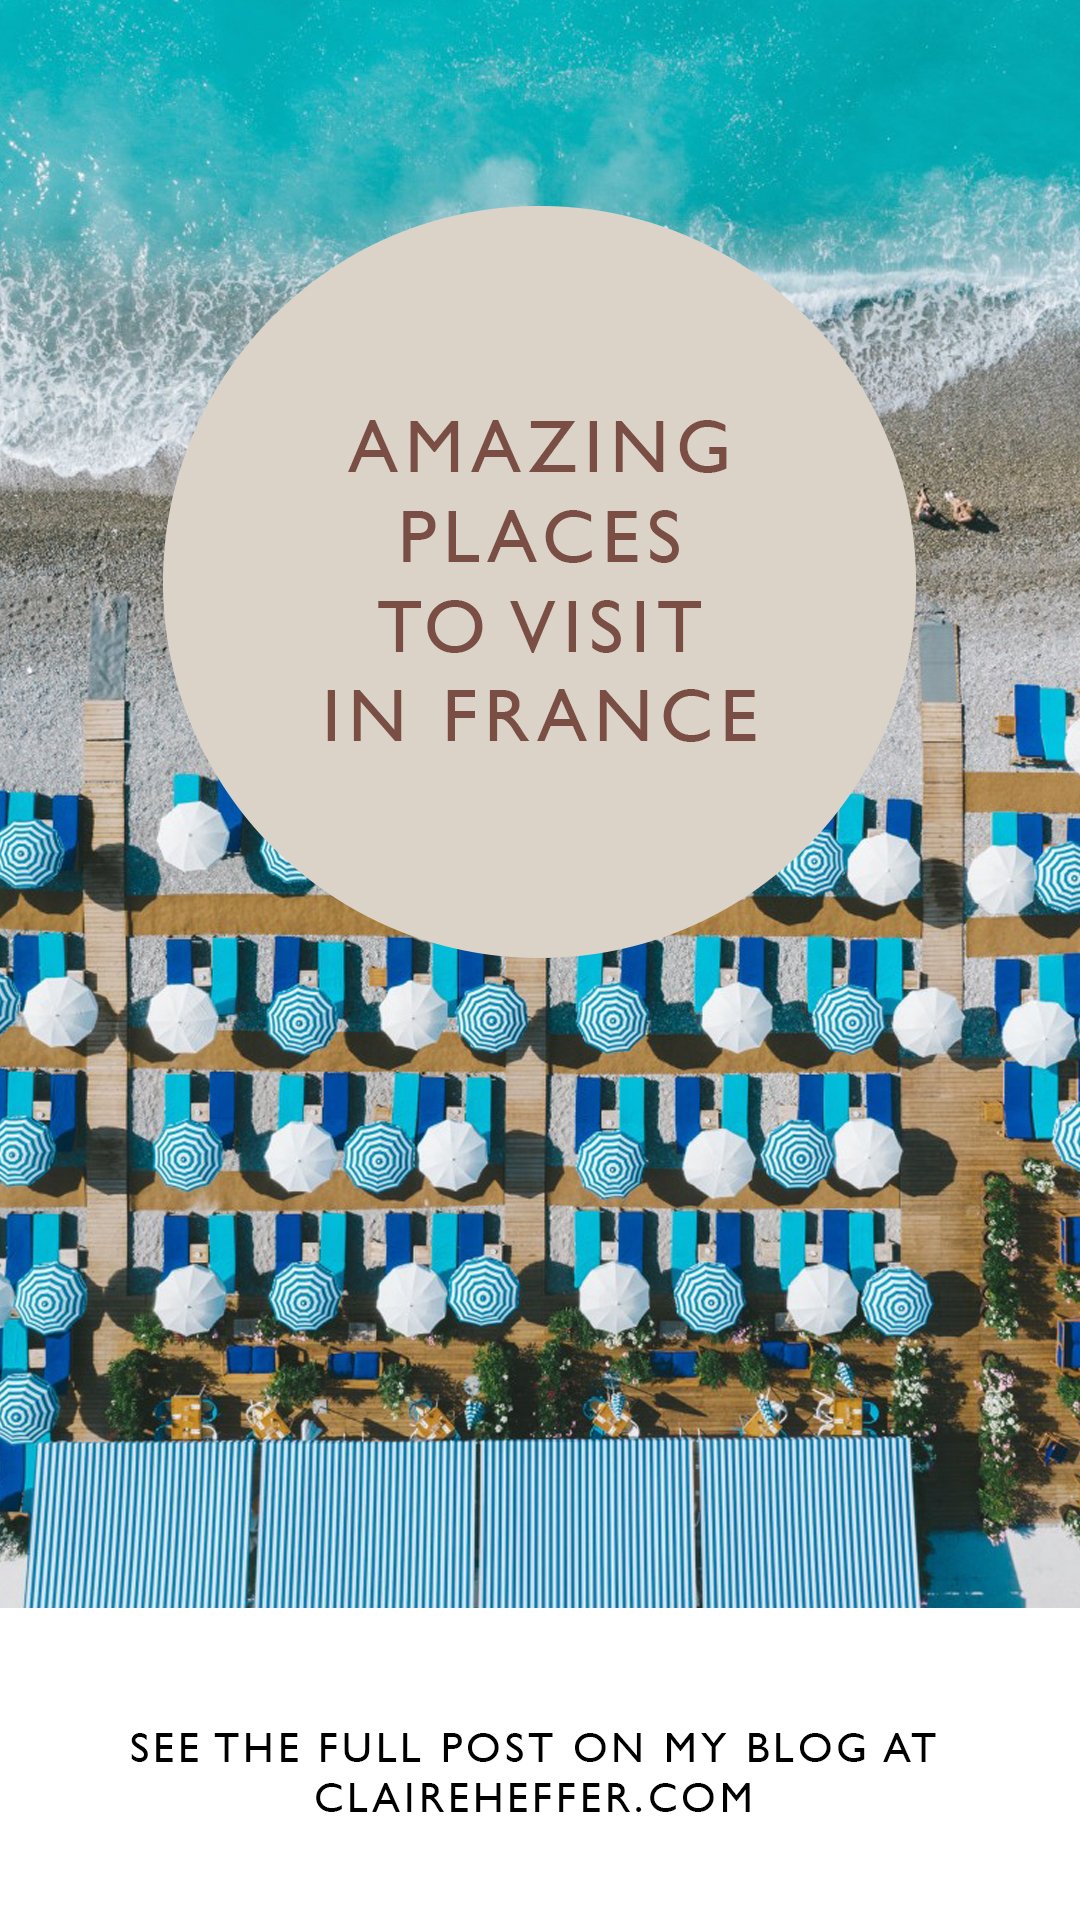 Focus On: Wanderlust, Holiday Travel Inspiration,  Vacation Travel Inspiration,  Vacation Inspiration, I Share With You The Best Places I’ve Been, Amazing Things To Experience All Over